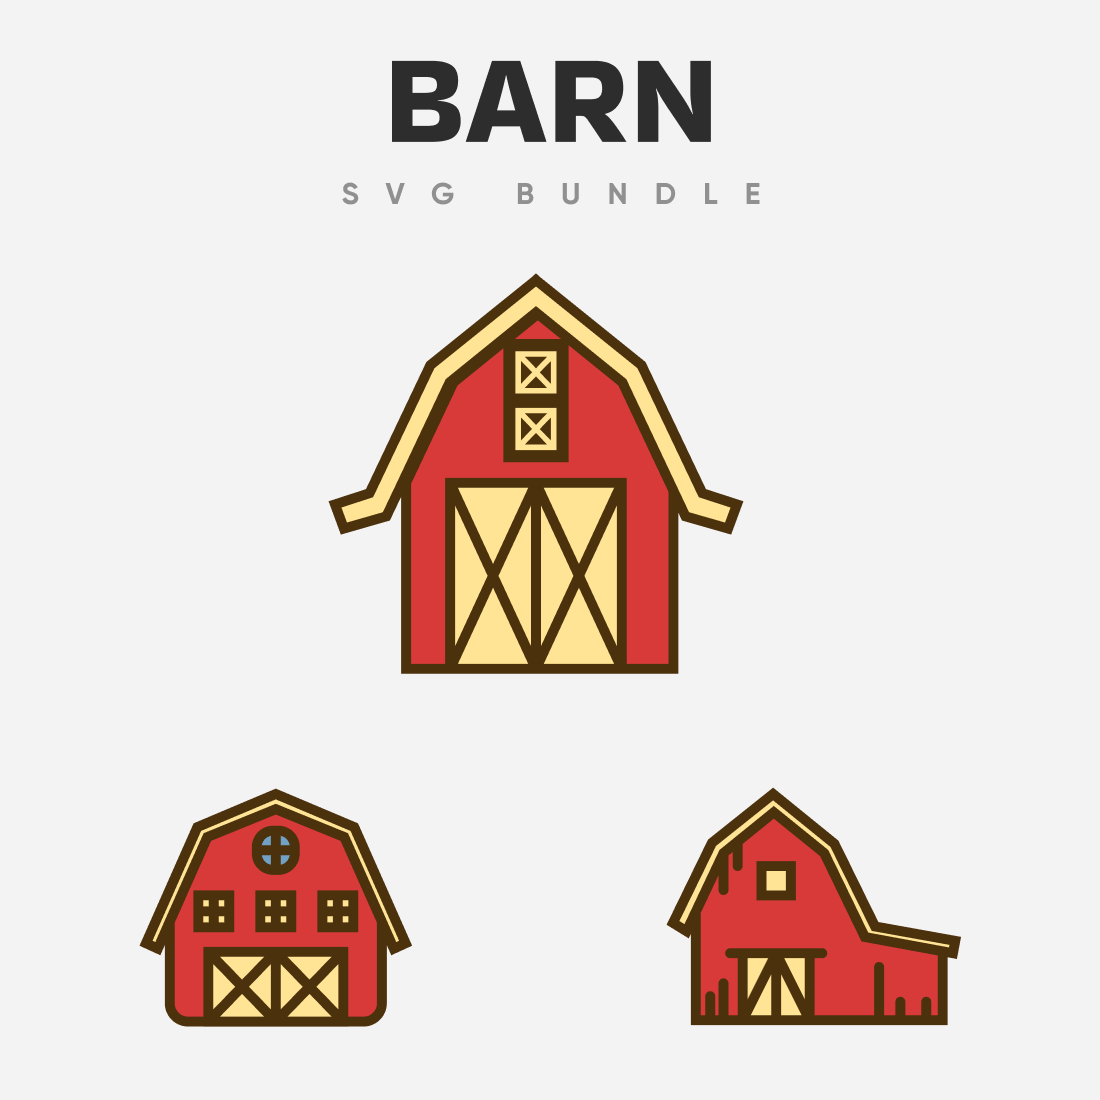 One large and two small barns with gates and windows.